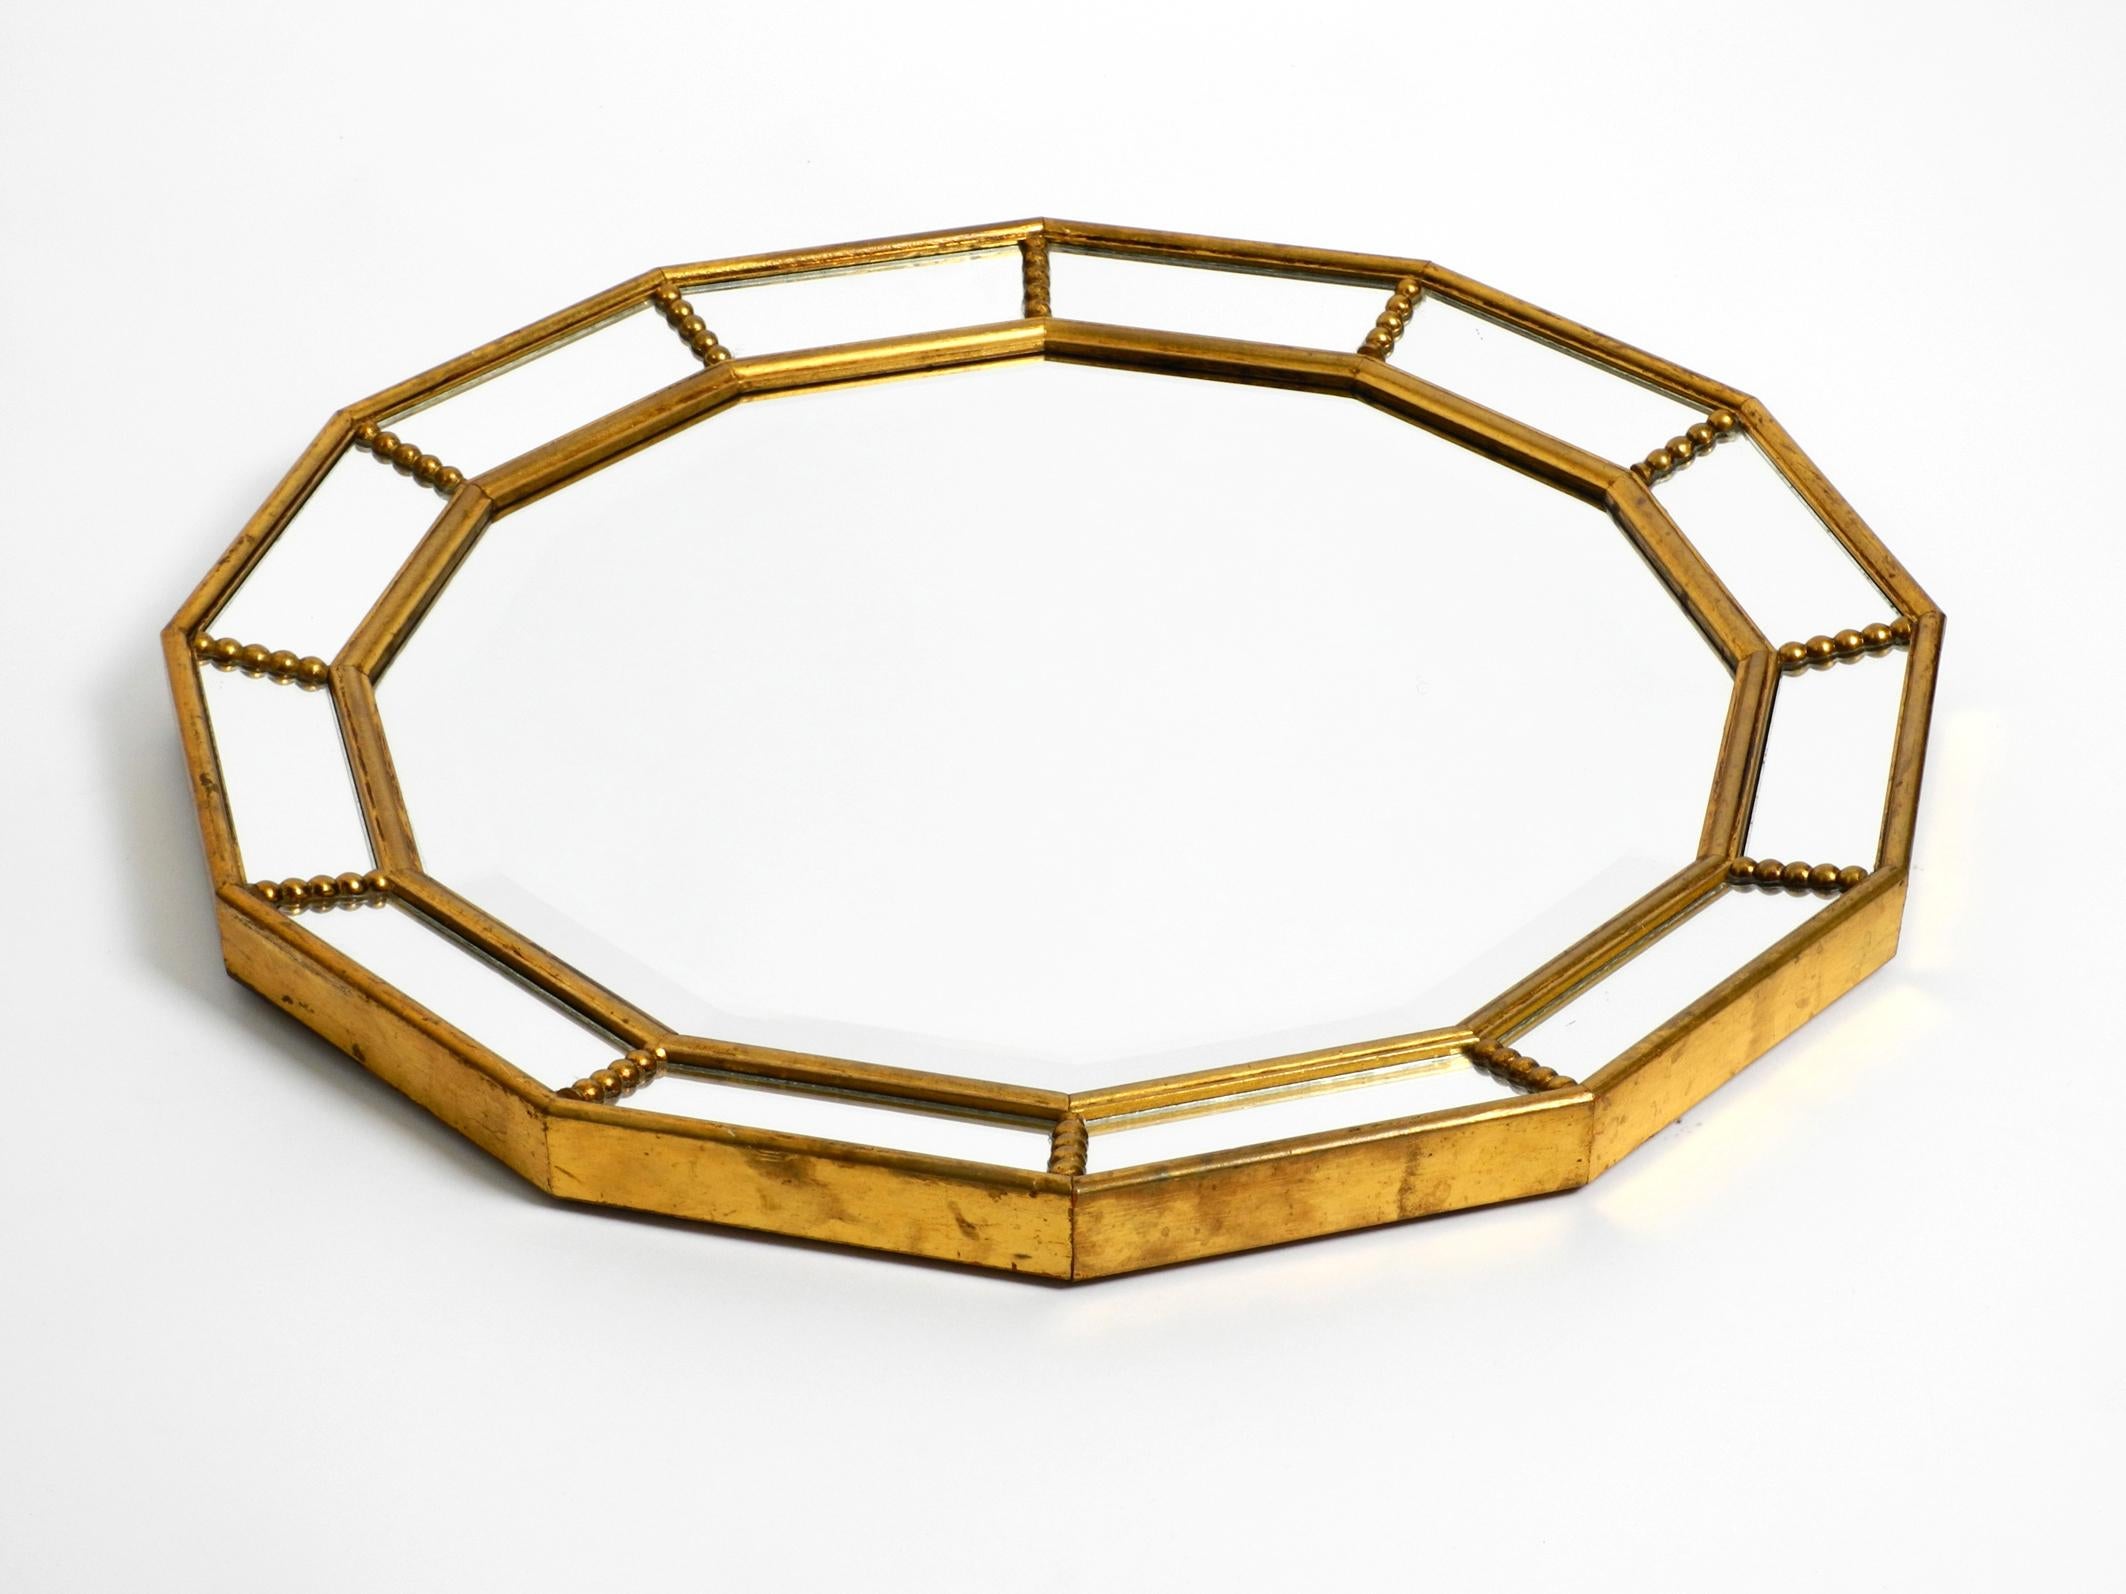 Beautiful Italian dodecagon wooden wall mirror, gold-plated.
Great Italian elegant design from the 1960s.
The frame is made of solid wood, on which the facetted mirror is in the middle 
and outside 12 small mirrors are arranged at an angle.
Very